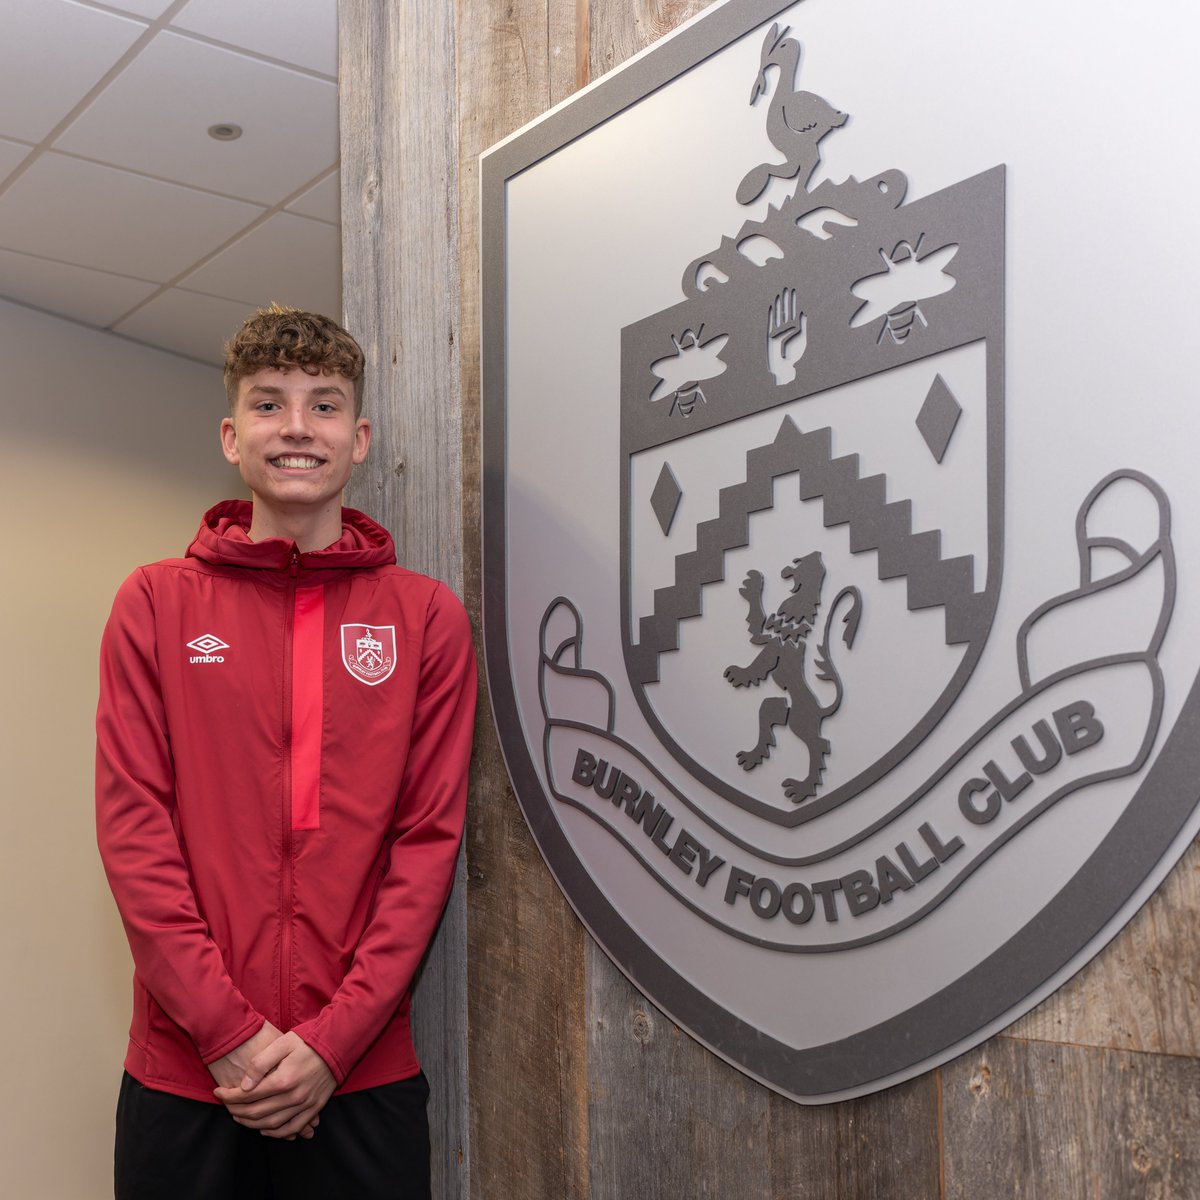 Best of luck to Archie Lorimer, who is now away with @Cymru U15s for the 'Torno Delle Nazioni' 🏴󠁧󠁢󠁷󠁬󠁳󠁿 The Welsh are based in Venice and have games against Norway and Austria!